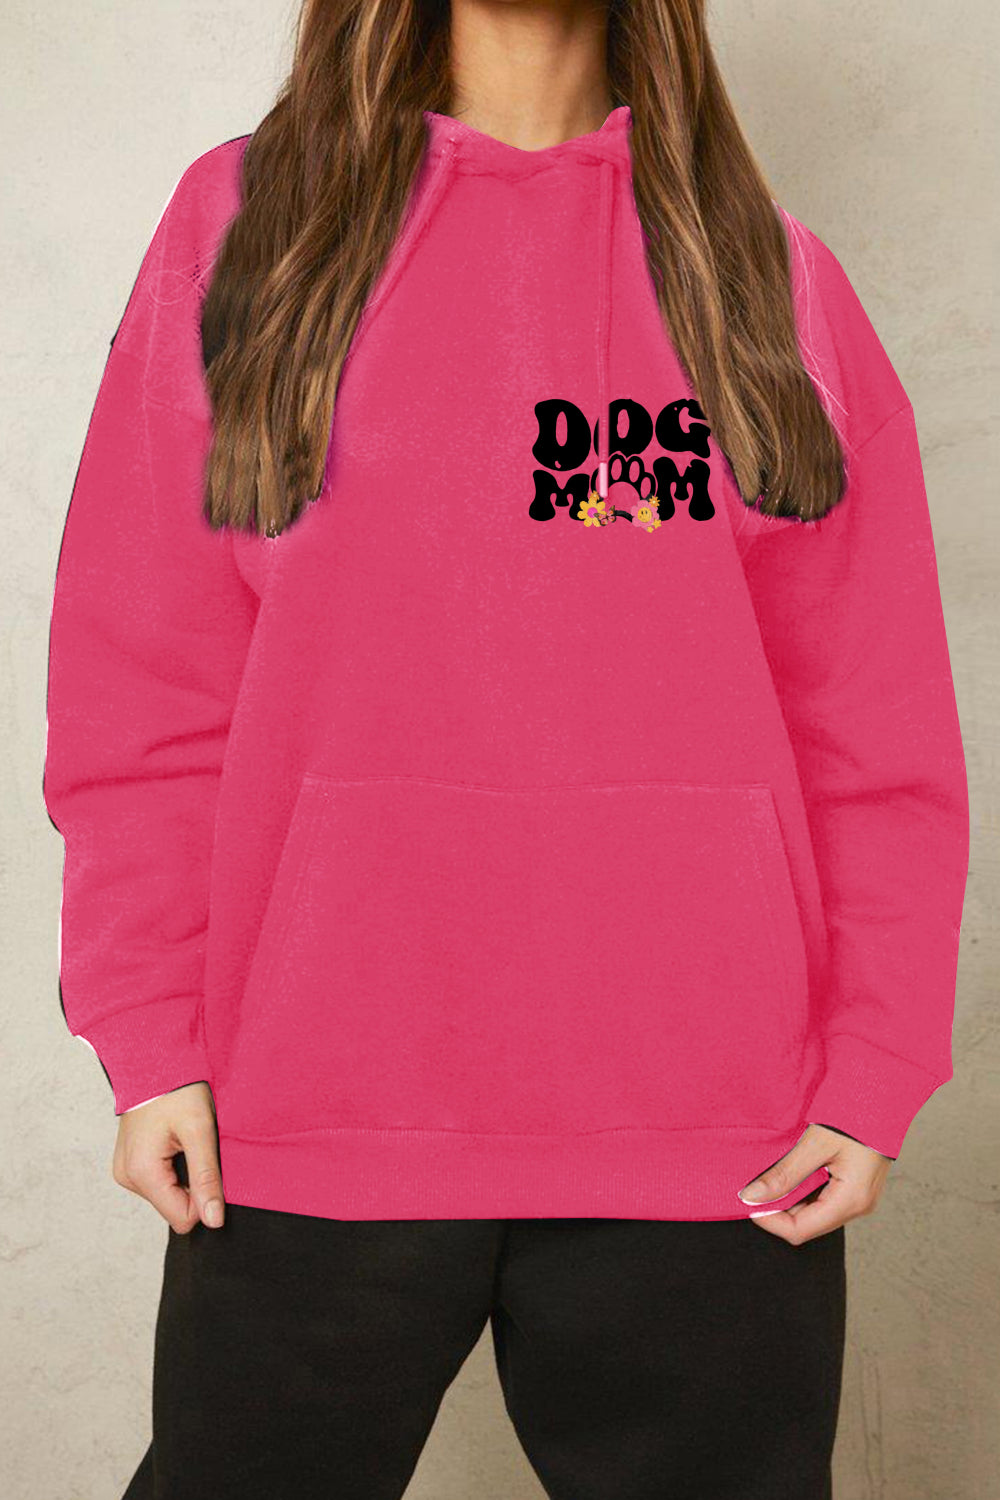 Full Size DOG MOM Graphic Hoodie - Women’s Clothing & Accessories - Shirts & Tops - 7 - 2024